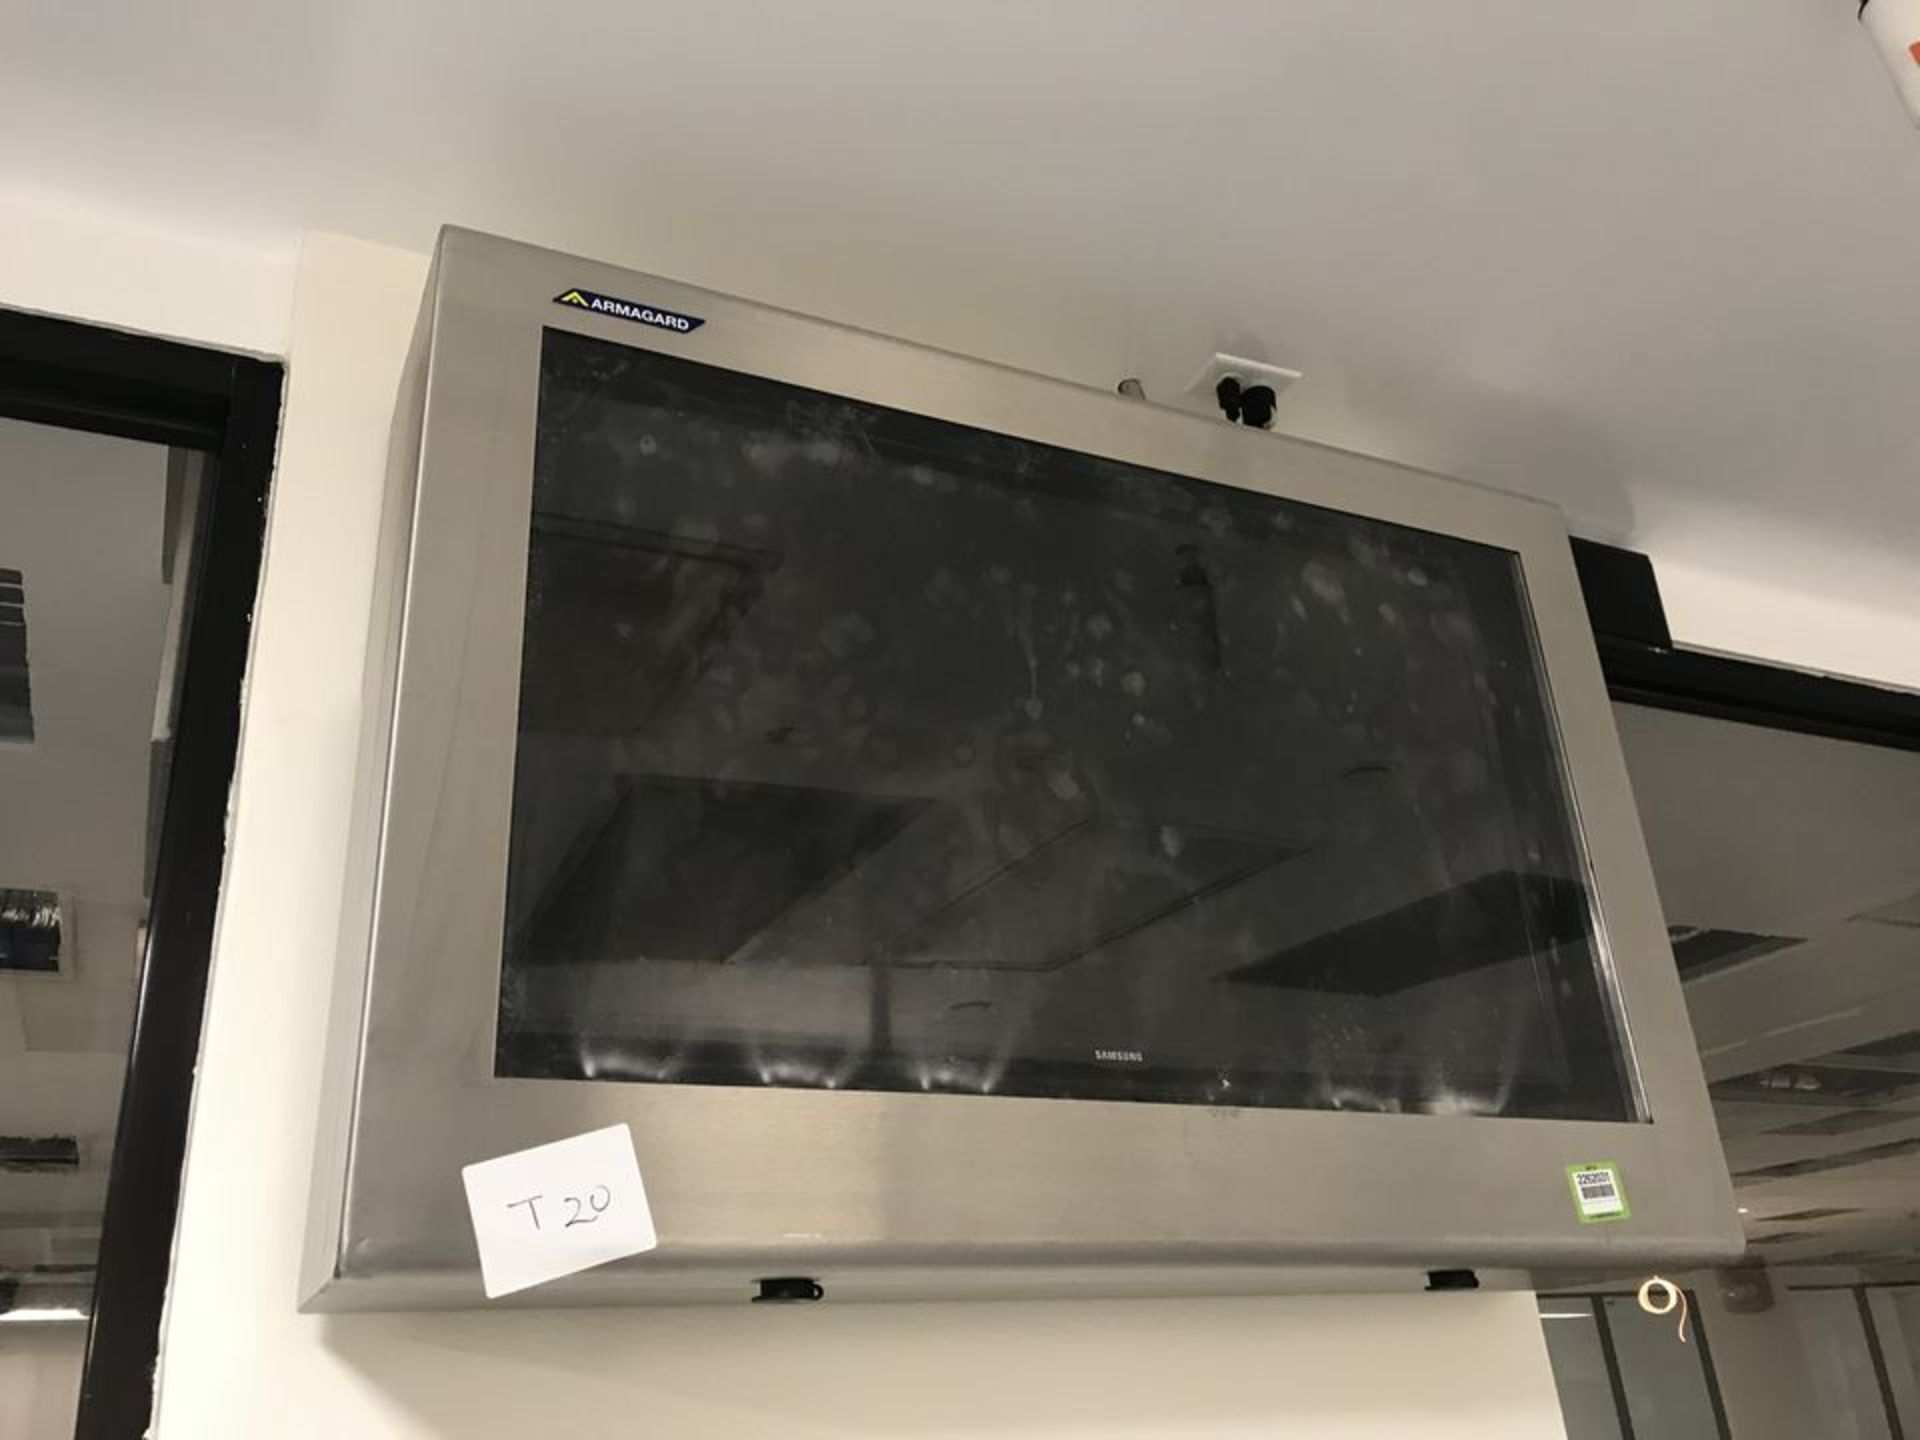 Stainless Steel TV/Monitor Cover with TVs - Image 2 of 3